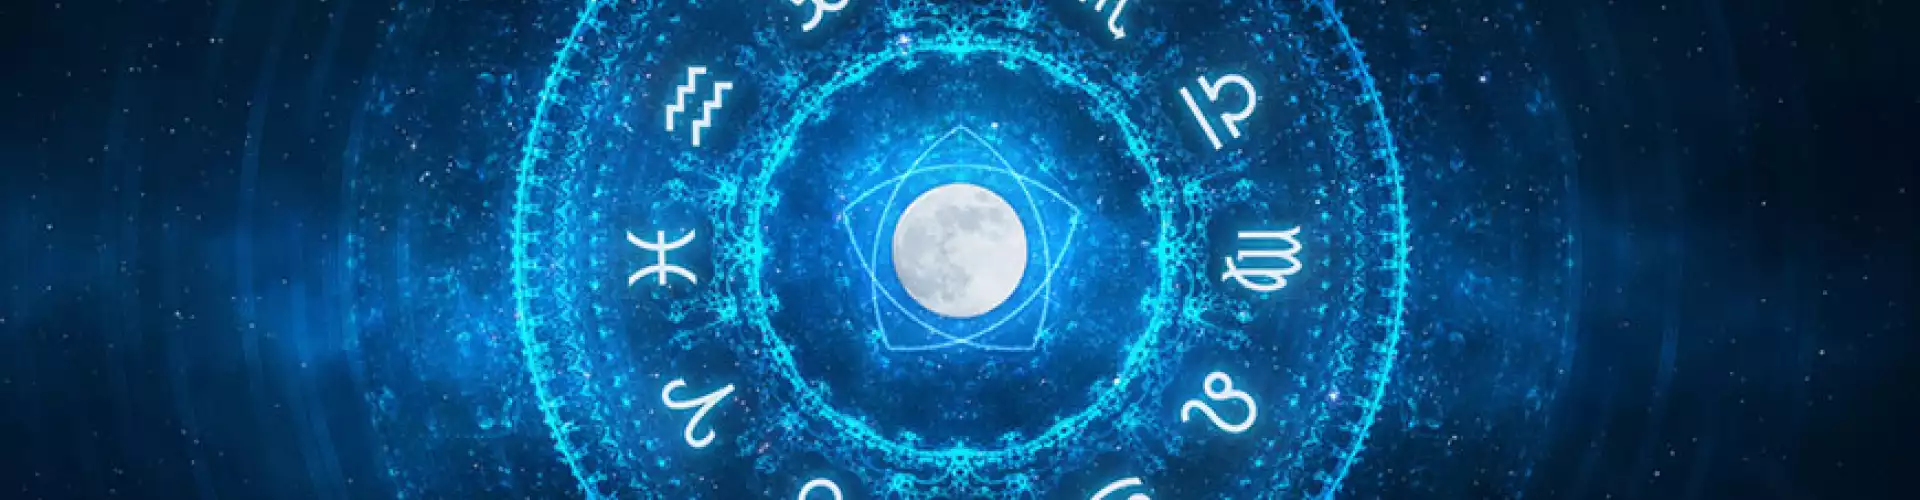 How to Use Astrology to Align with your True Self and Soul's Path